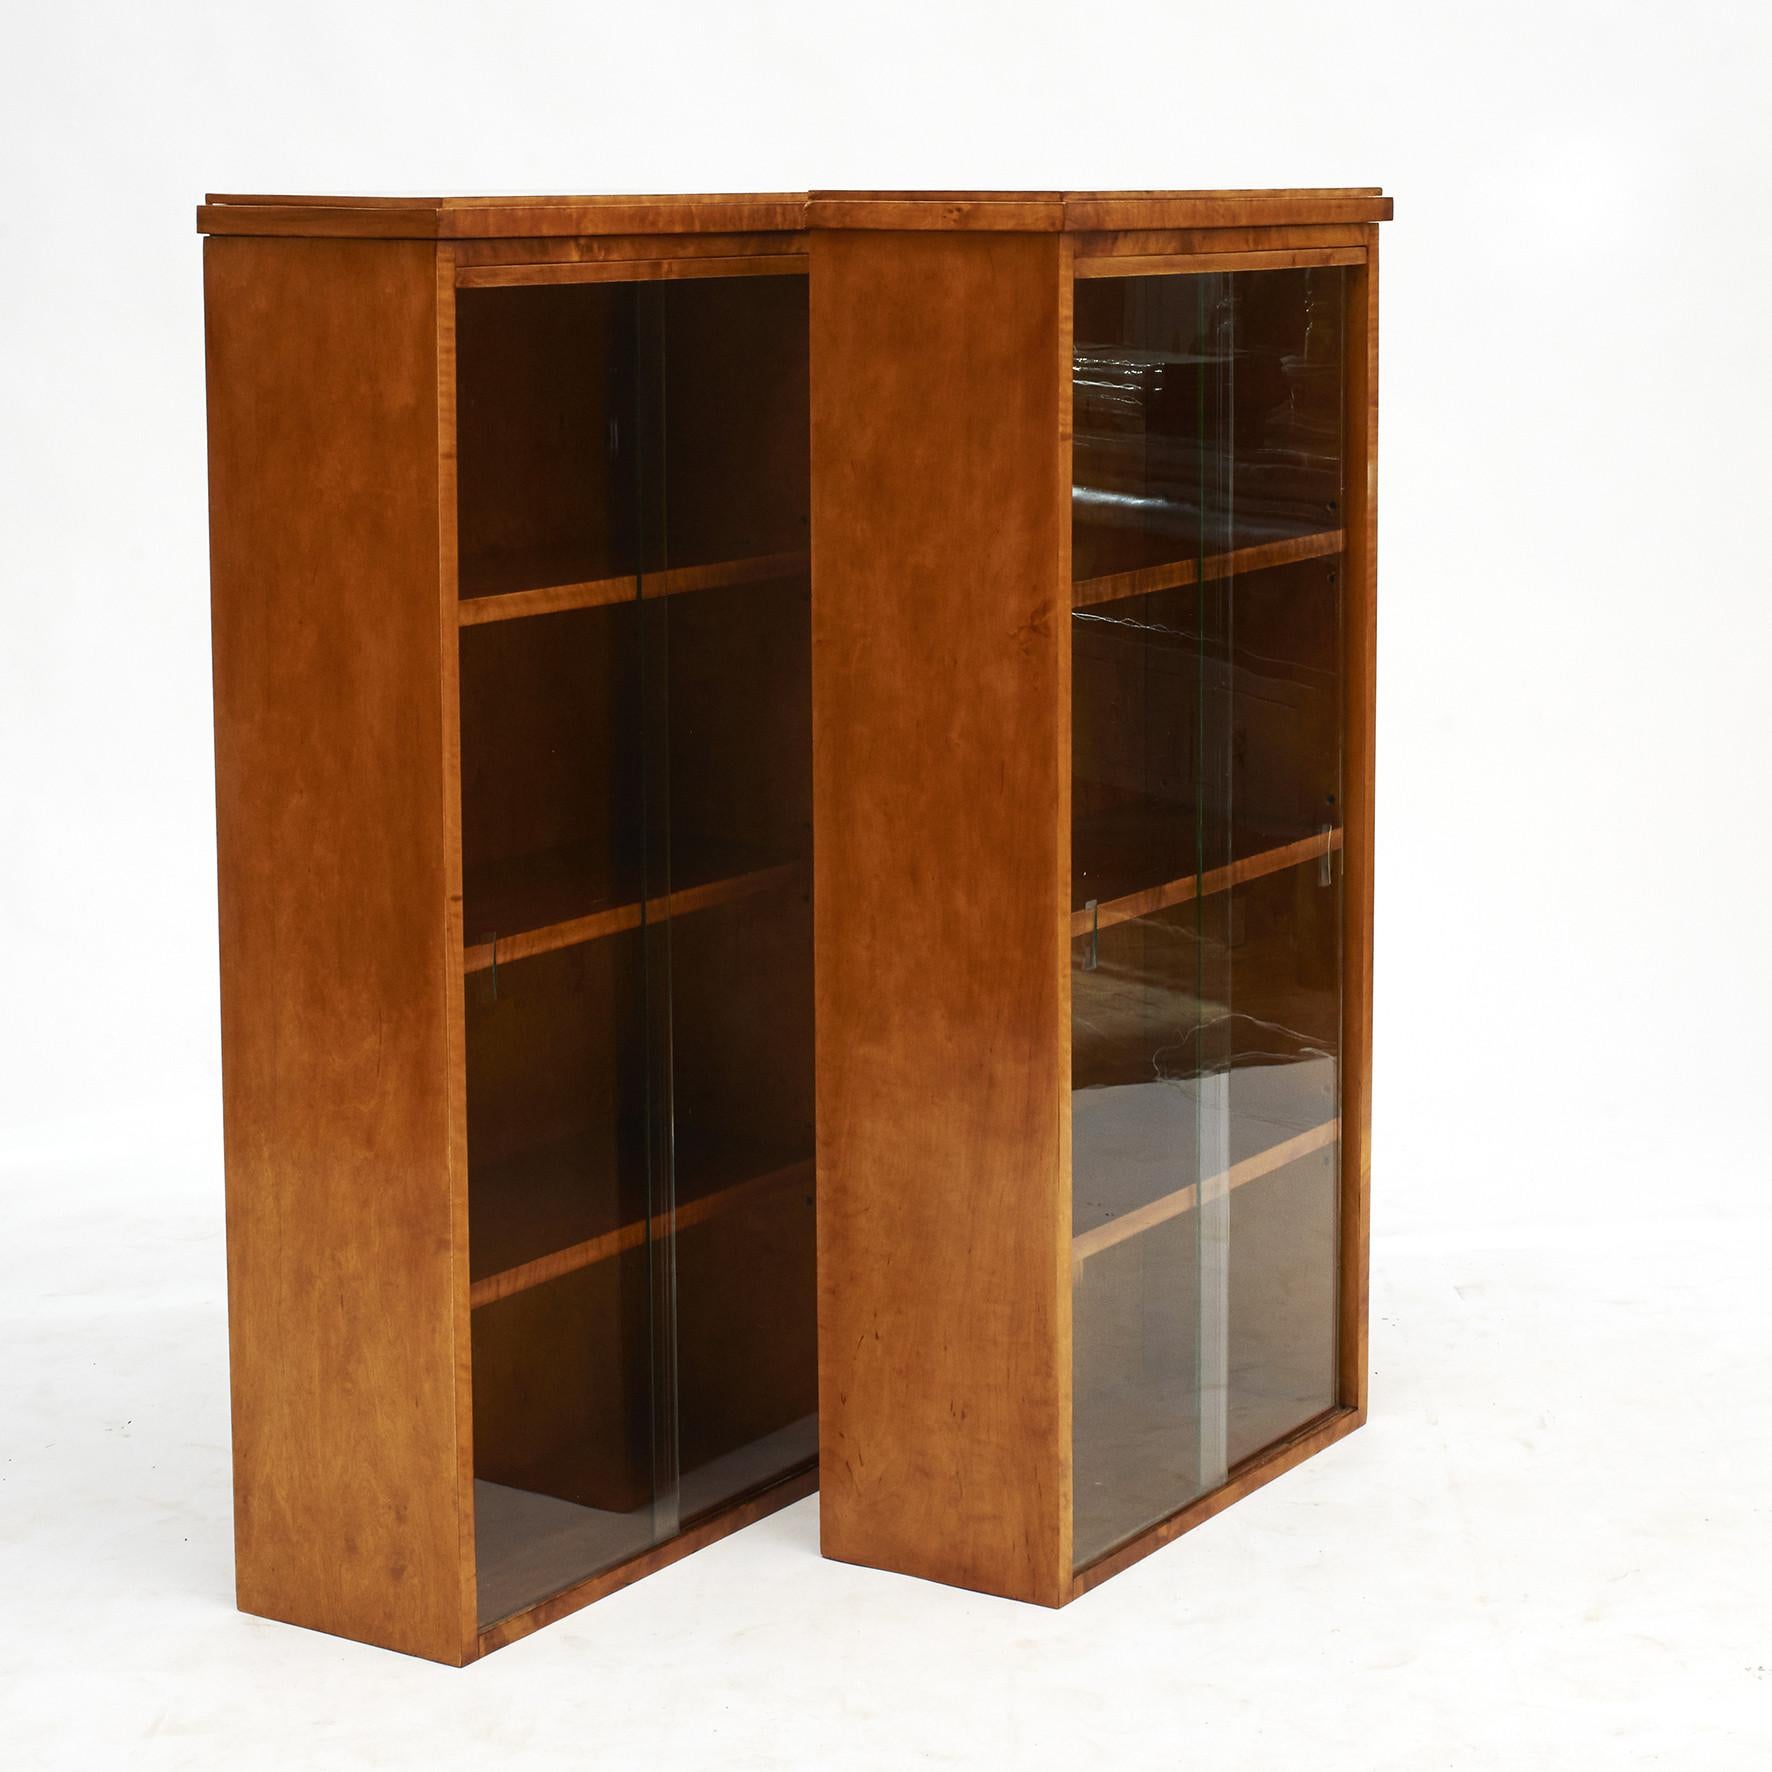 Pair of Art Deco hanging cabinets, veneered with flamed birch.
Sliding glass doors with three shelves inside.
Denmark c. 1920.
Sold individually for 2.020,- €.